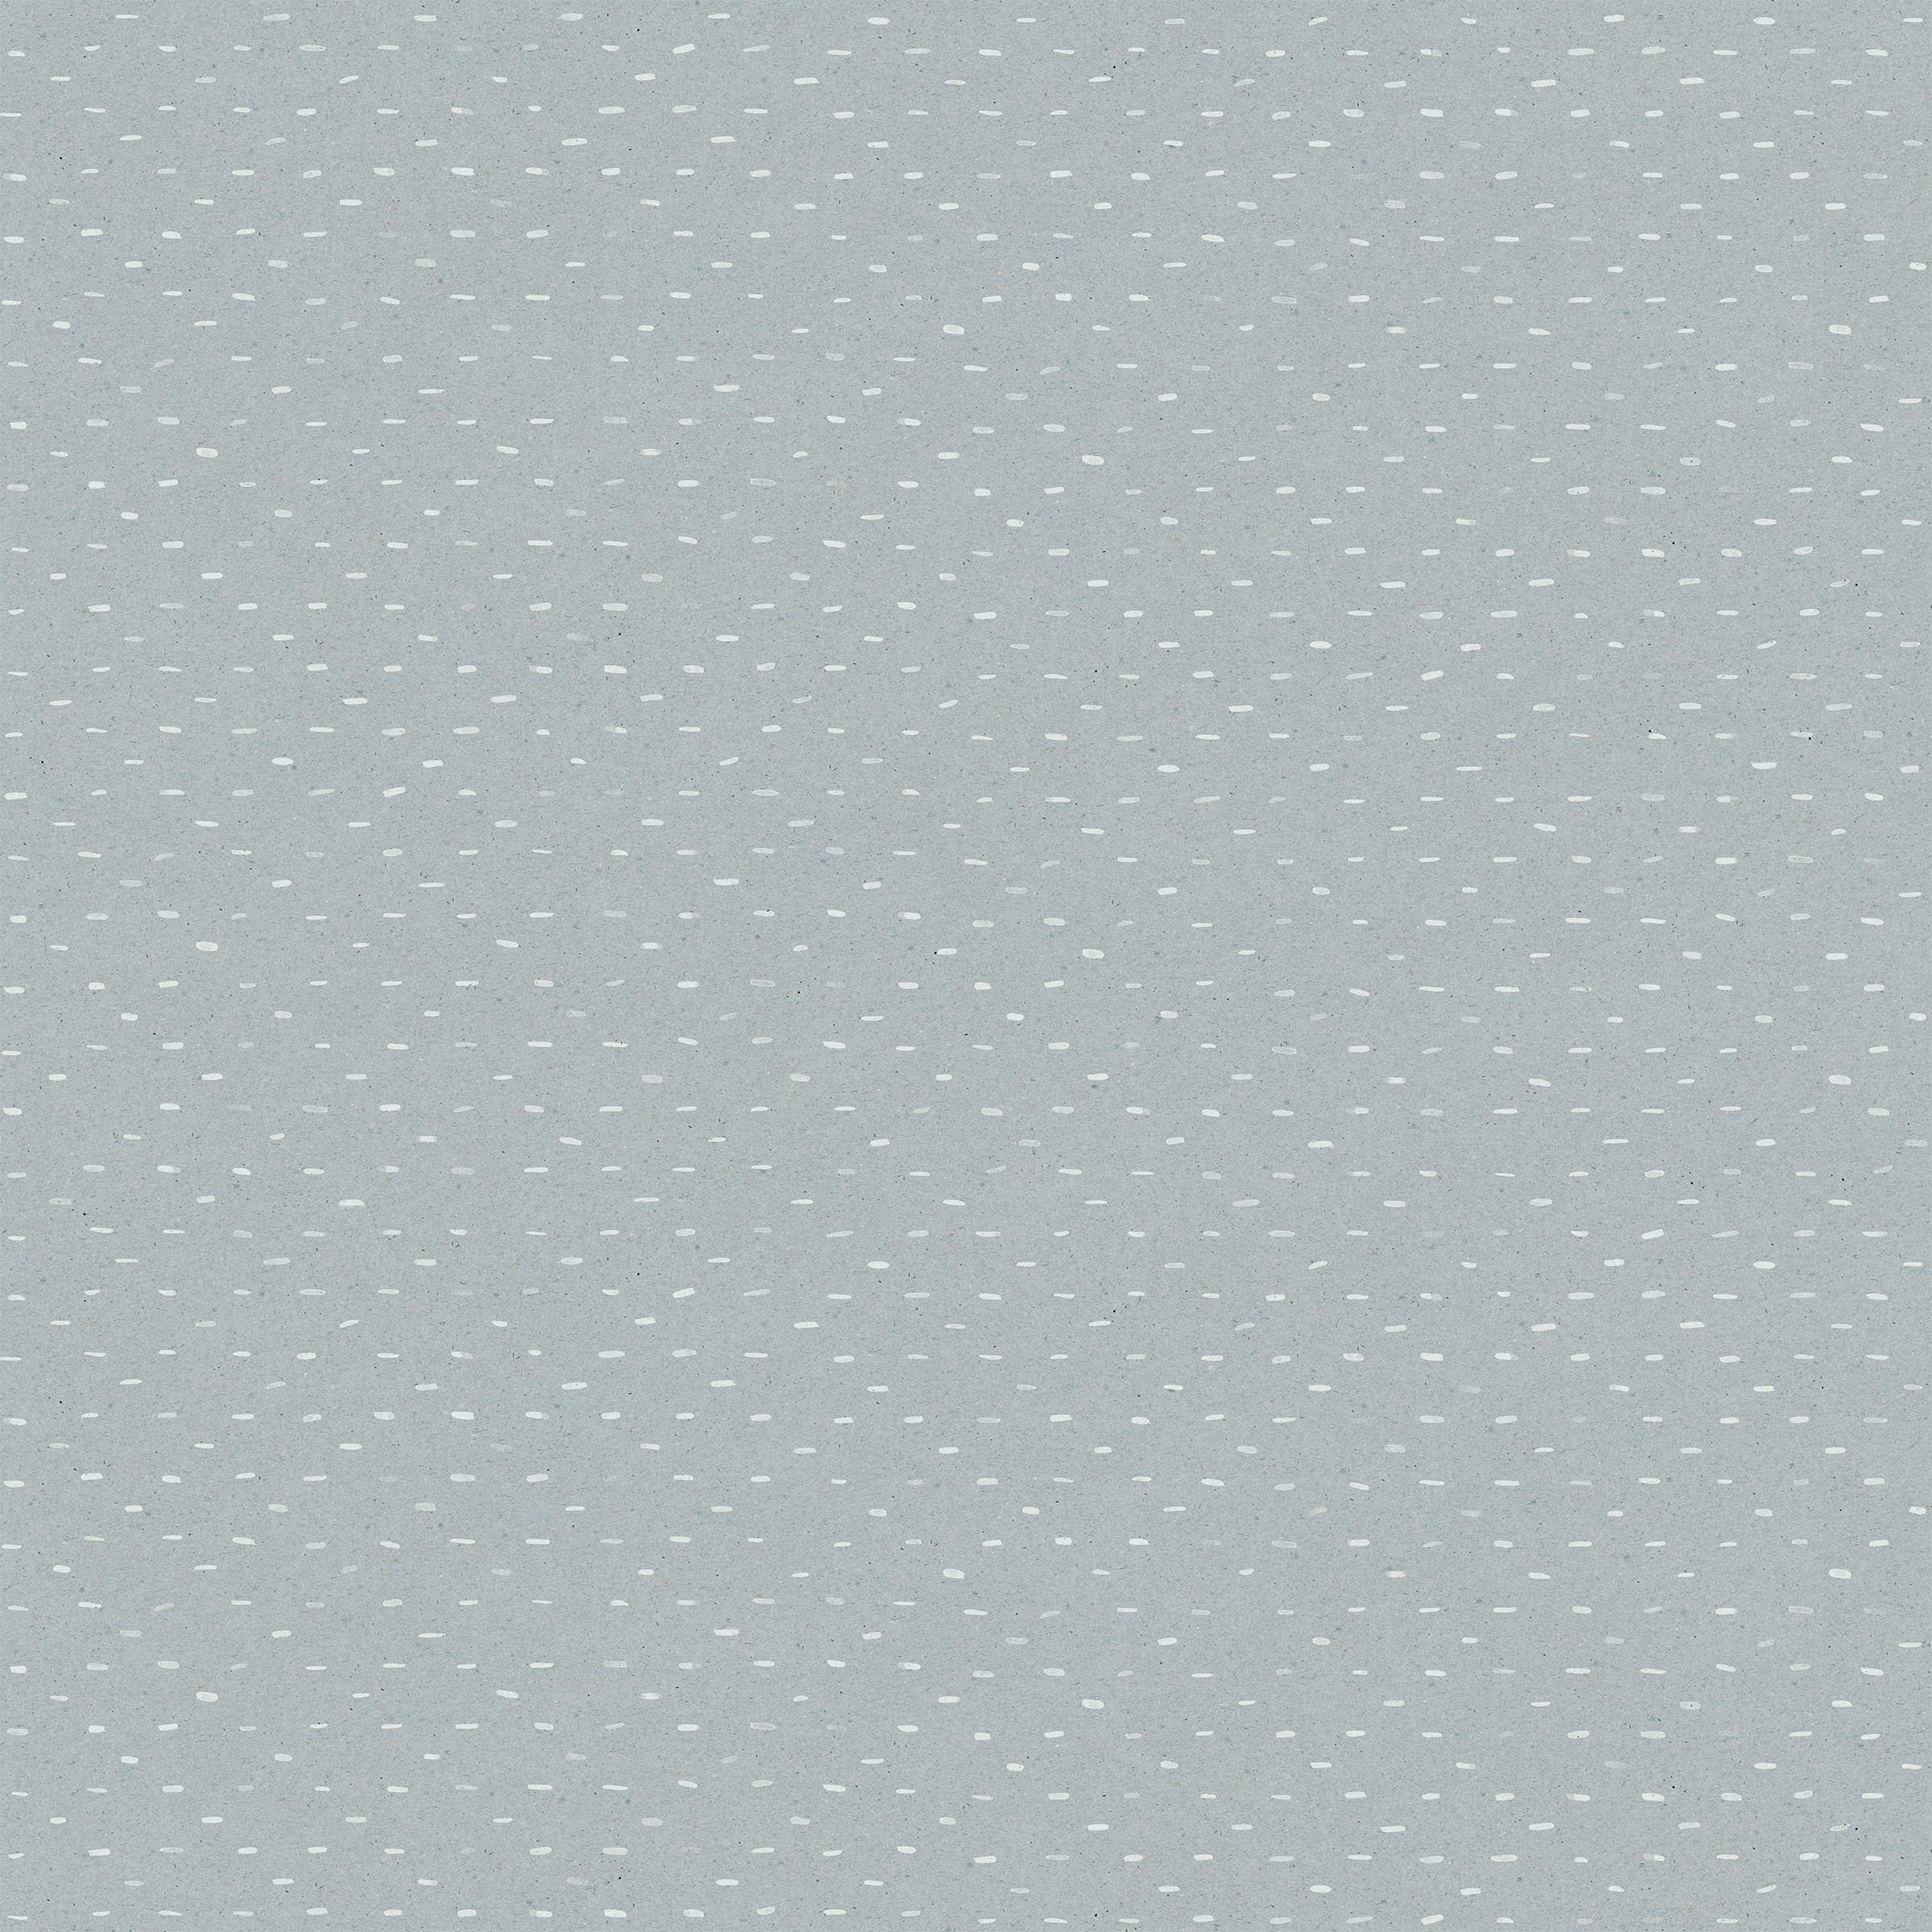 Detail of wallpaper in a dotted diamond grid in white on a light blue field.